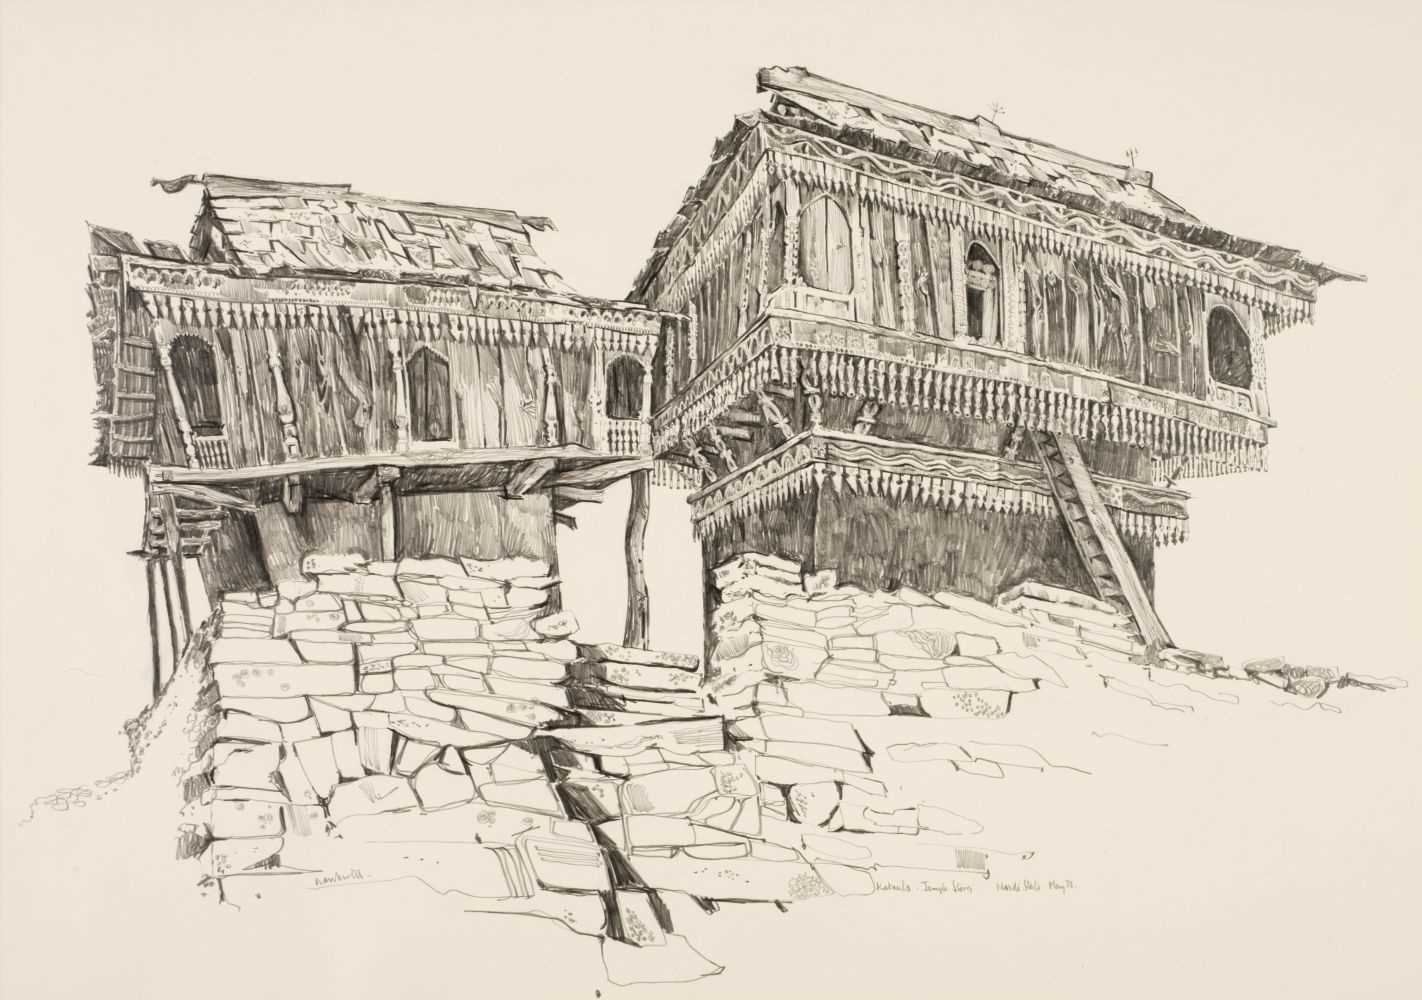 Lot 85 - India. Five architectural sketches by John Nankivell (1941-), 1971